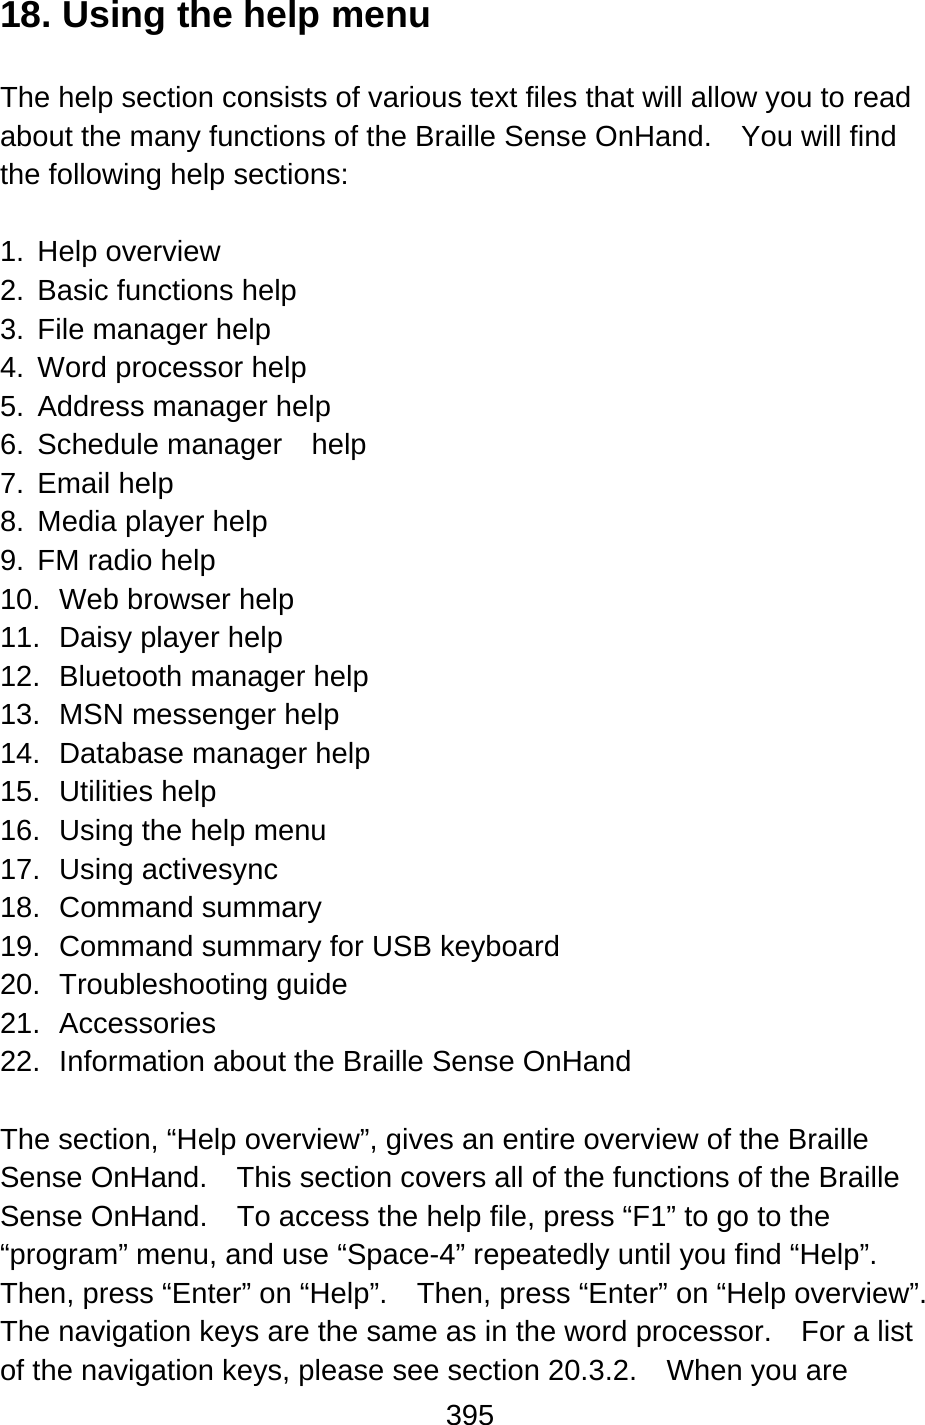 395  18. Using the help menu  The help section consists of various text files that will allow you to read about the many functions of the Braille Sense OnHand.    You will find the following help sections:  1. Help overview 2.  Basic functions help 3.  File manager help 4.  Word processor help 5.  Address manager help 6. Schedule manager  help 7. Email help 8.  Media player help 9. FM radio help 10.  Web browser help 11.  Daisy player help 12.  Bluetooth manager help 13. MSN messenger help 14.  Database manager help 15. Utilities help 16.  Using the help menu 17. Using activesync 18. Command summary 19.  Command summary for USB keyboard 20. Troubleshooting guide 21. Accessories 22. Information about the Braille Sense OnHand  The section, “Help overview”, gives an entire overview of the Braille Sense OnHand.    This section covers all of the functions of the Braille Sense OnHand.    To access the help file, press “F1” to go to the “program” menu, and use “Space-4” repeatedly until you find “Help”.   Then, press “Enter” on “Help”.    Then, press “Enter” on “Help overview”.   The navigation keys are the same as in the word processor.    For a list of the navigation keys, please see section 20.3.2.  When you are 